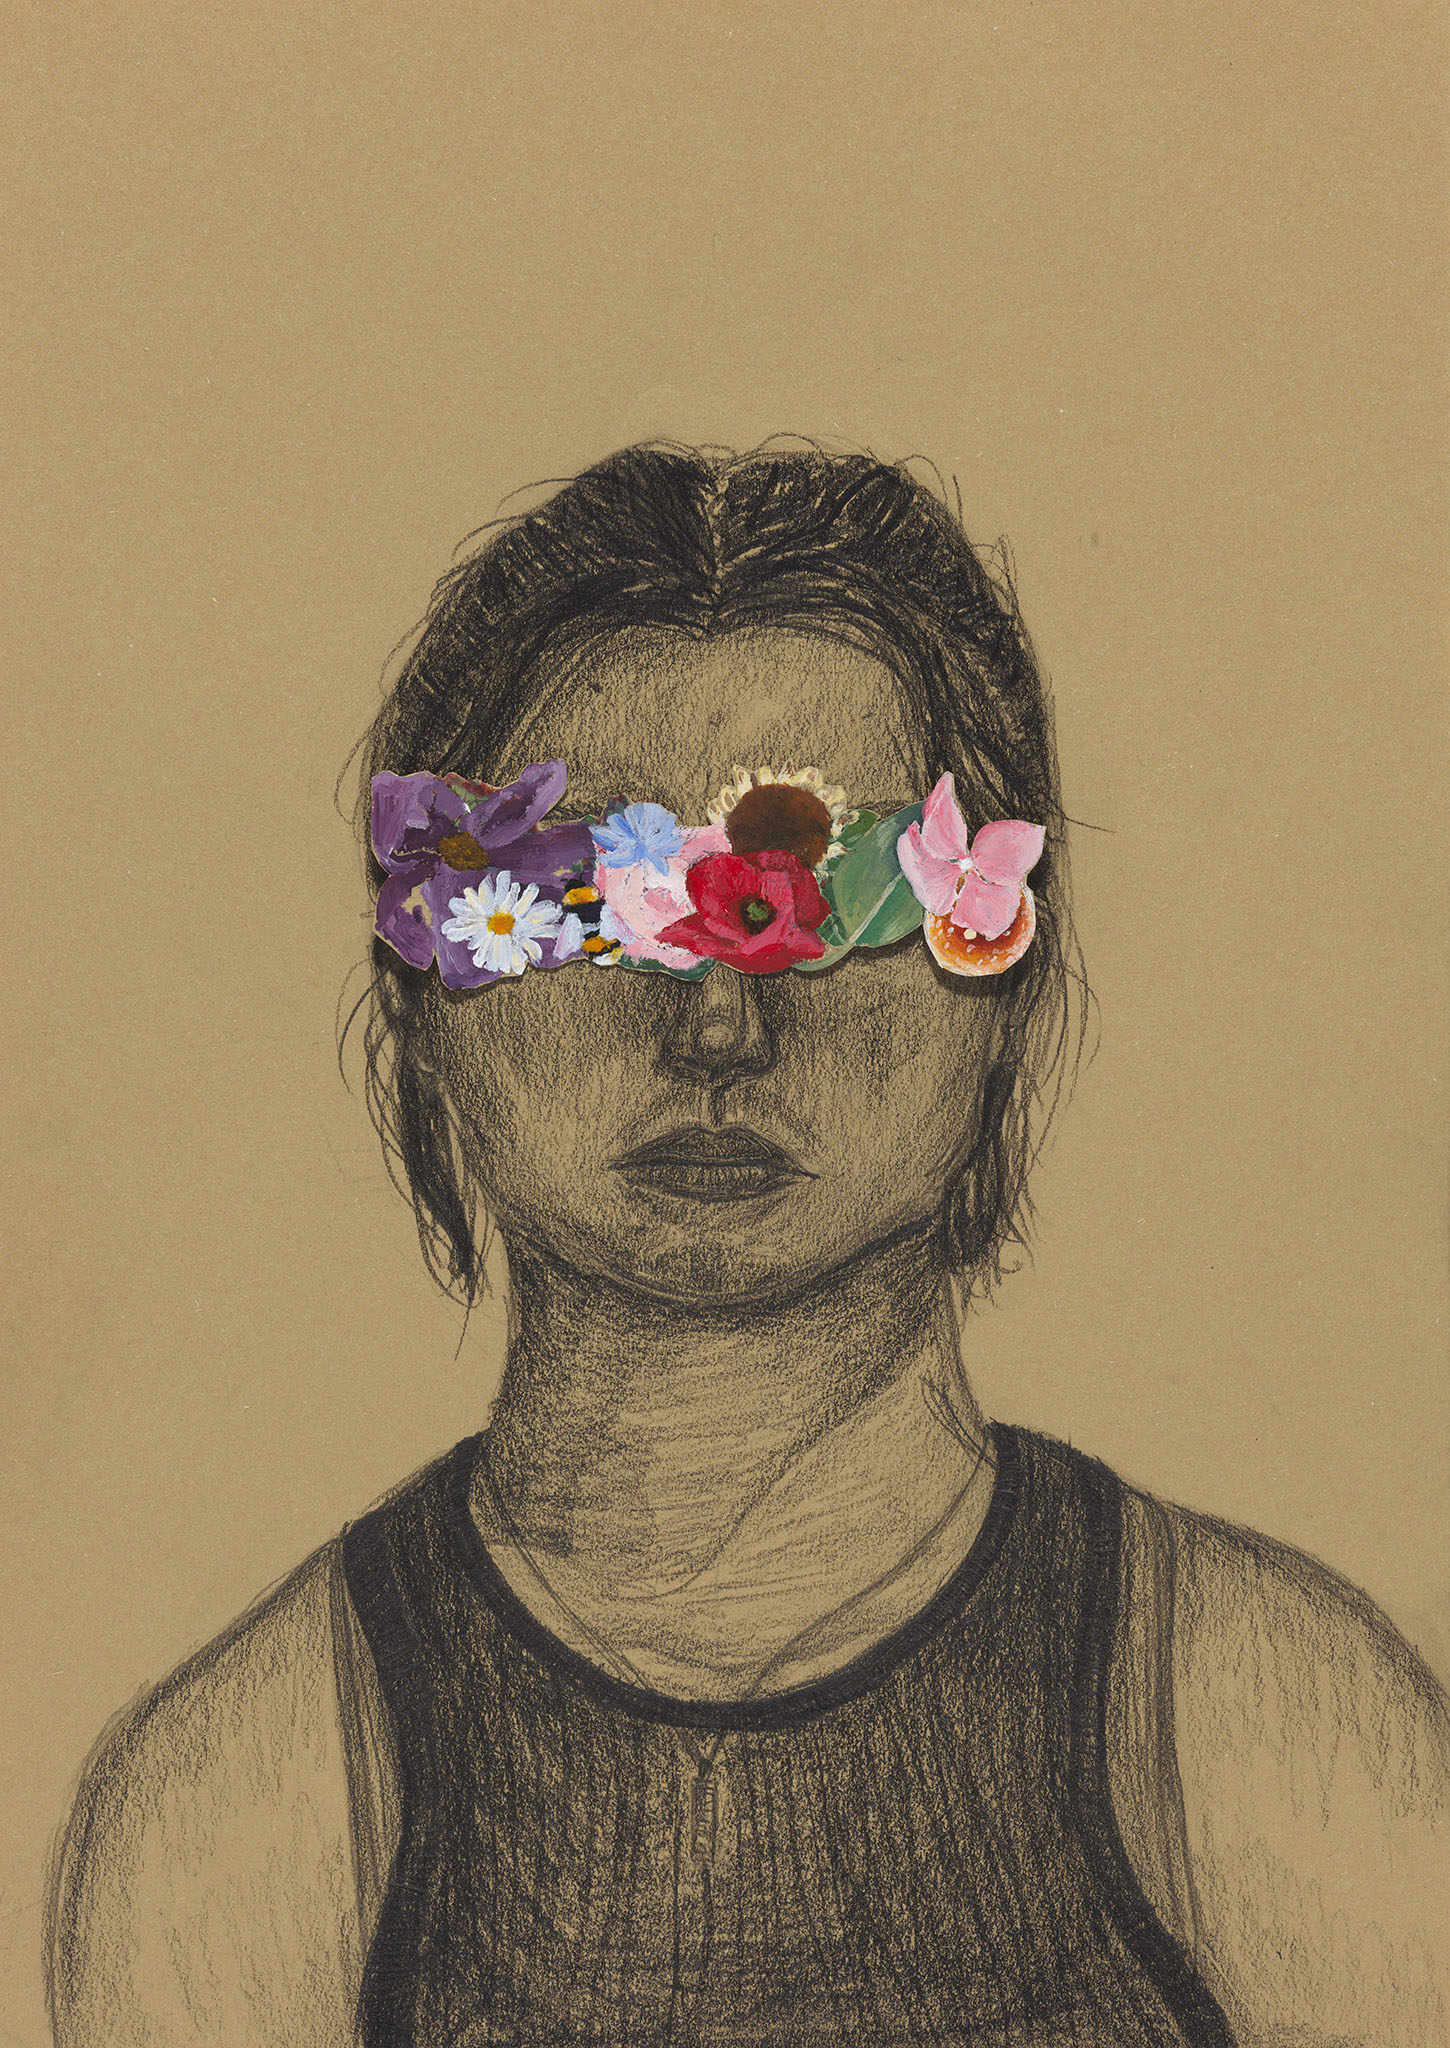 Pencil sketch of a person wearing a tank top with painted flowers covering their eyes